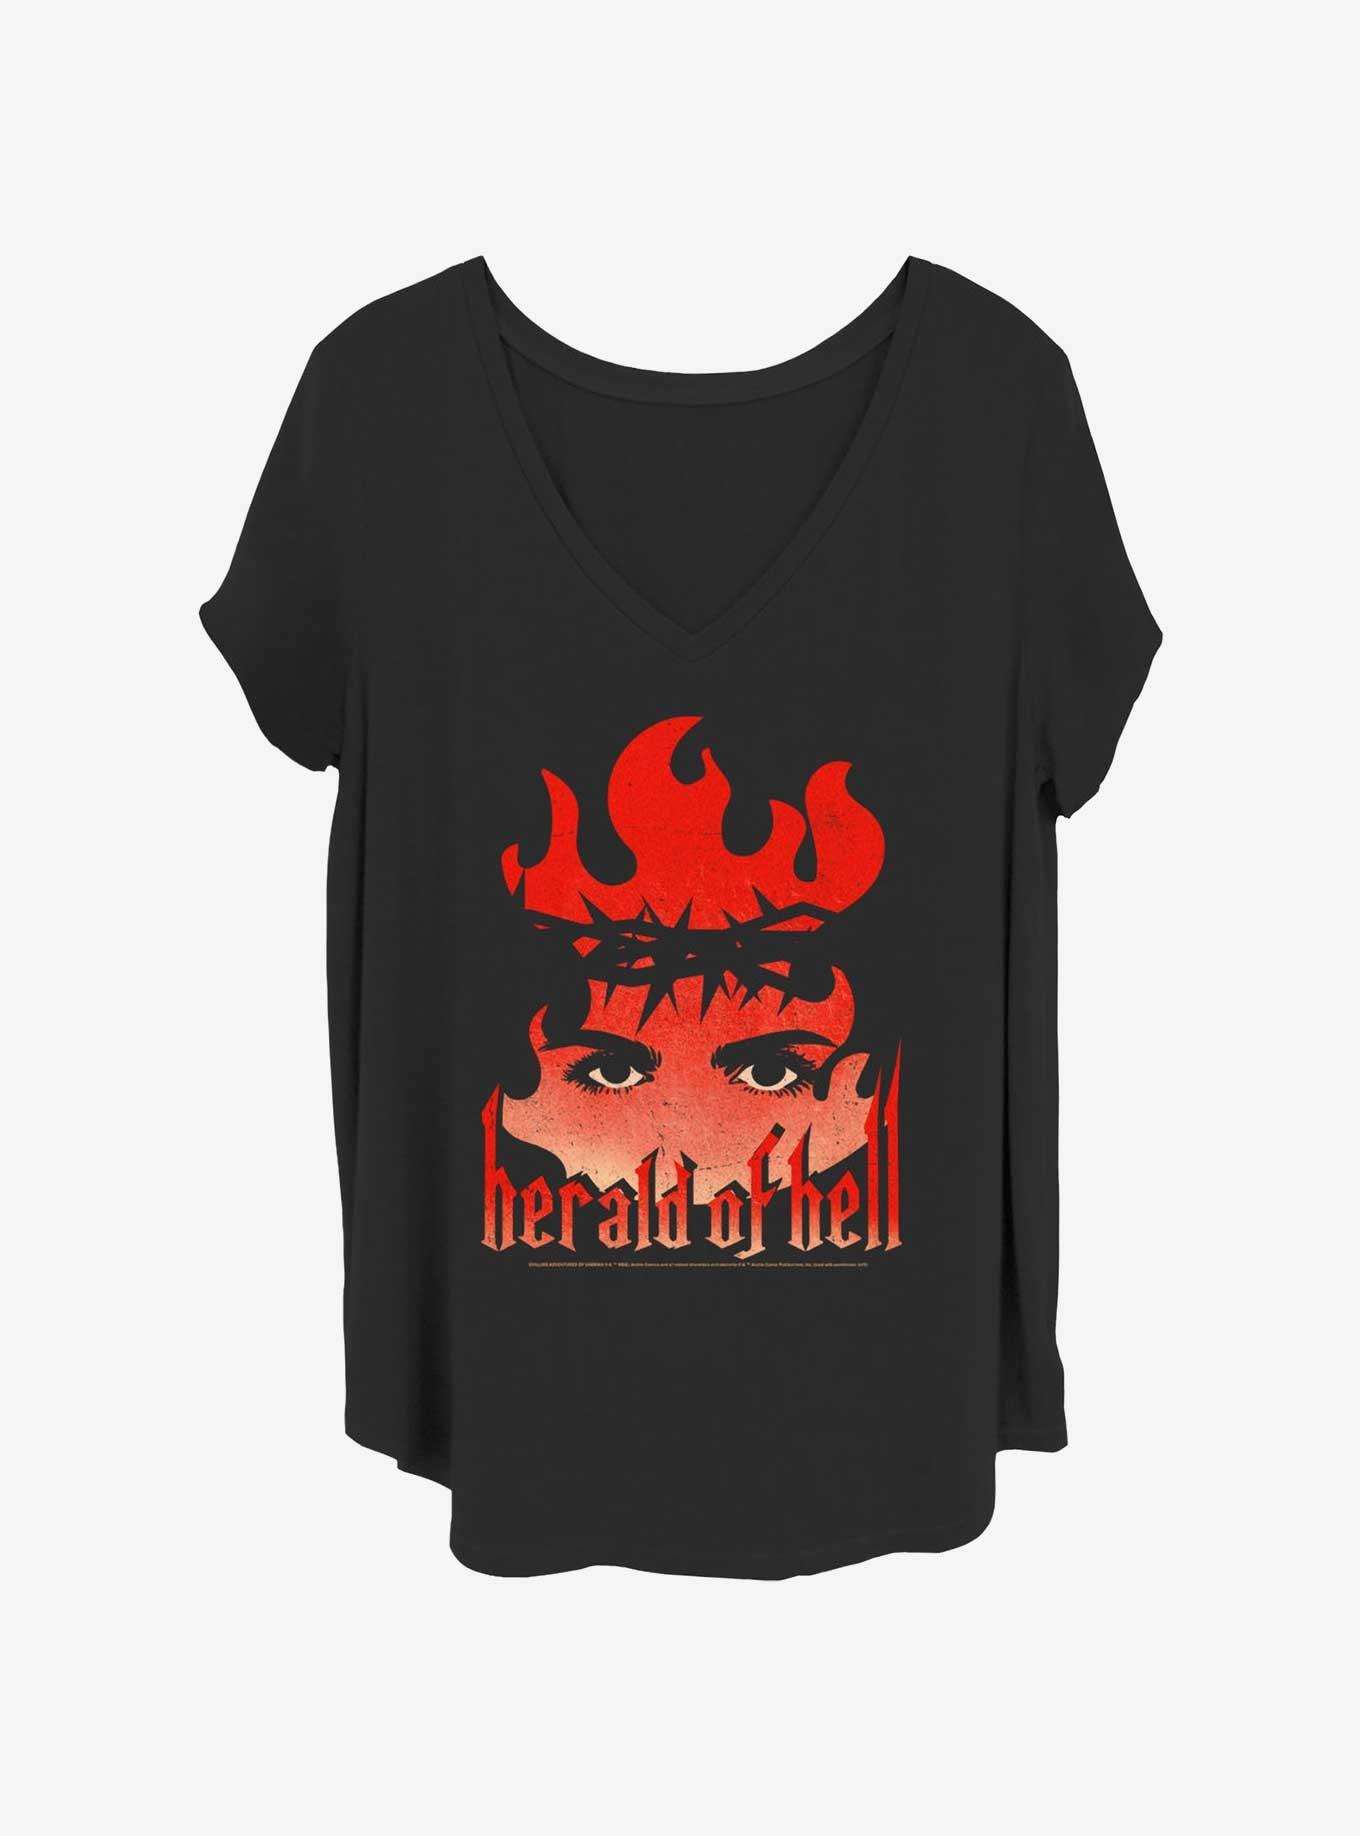 Chilling Adventures of Sabrina Herald Of Hell Womens T-Shirt Plus Size, BLACK, hi-res